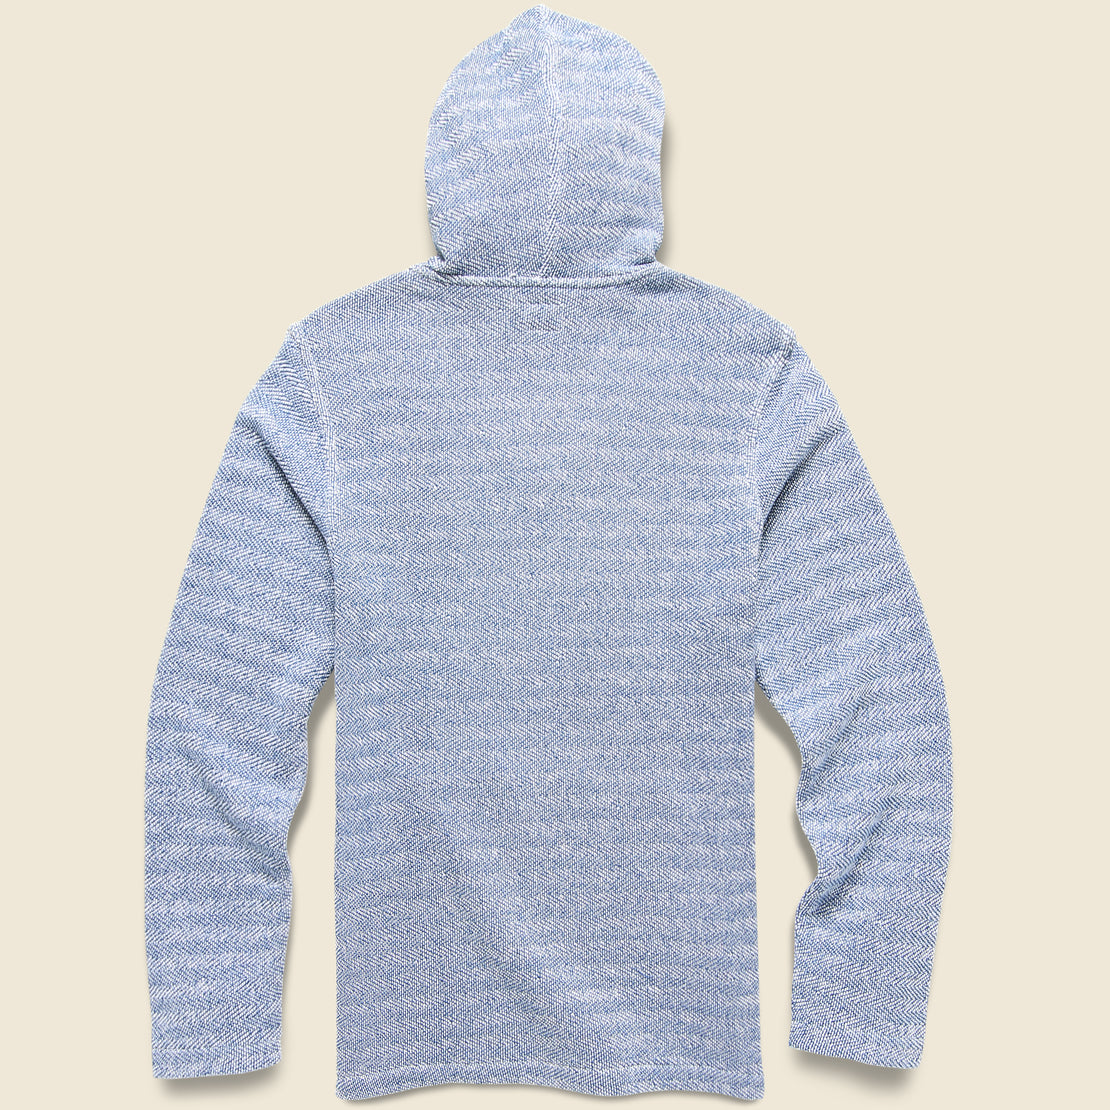 Whitewater Hoodie - Whitewater - Faherty - STAG Provisions - Tops - Fleece / Sweatshirt